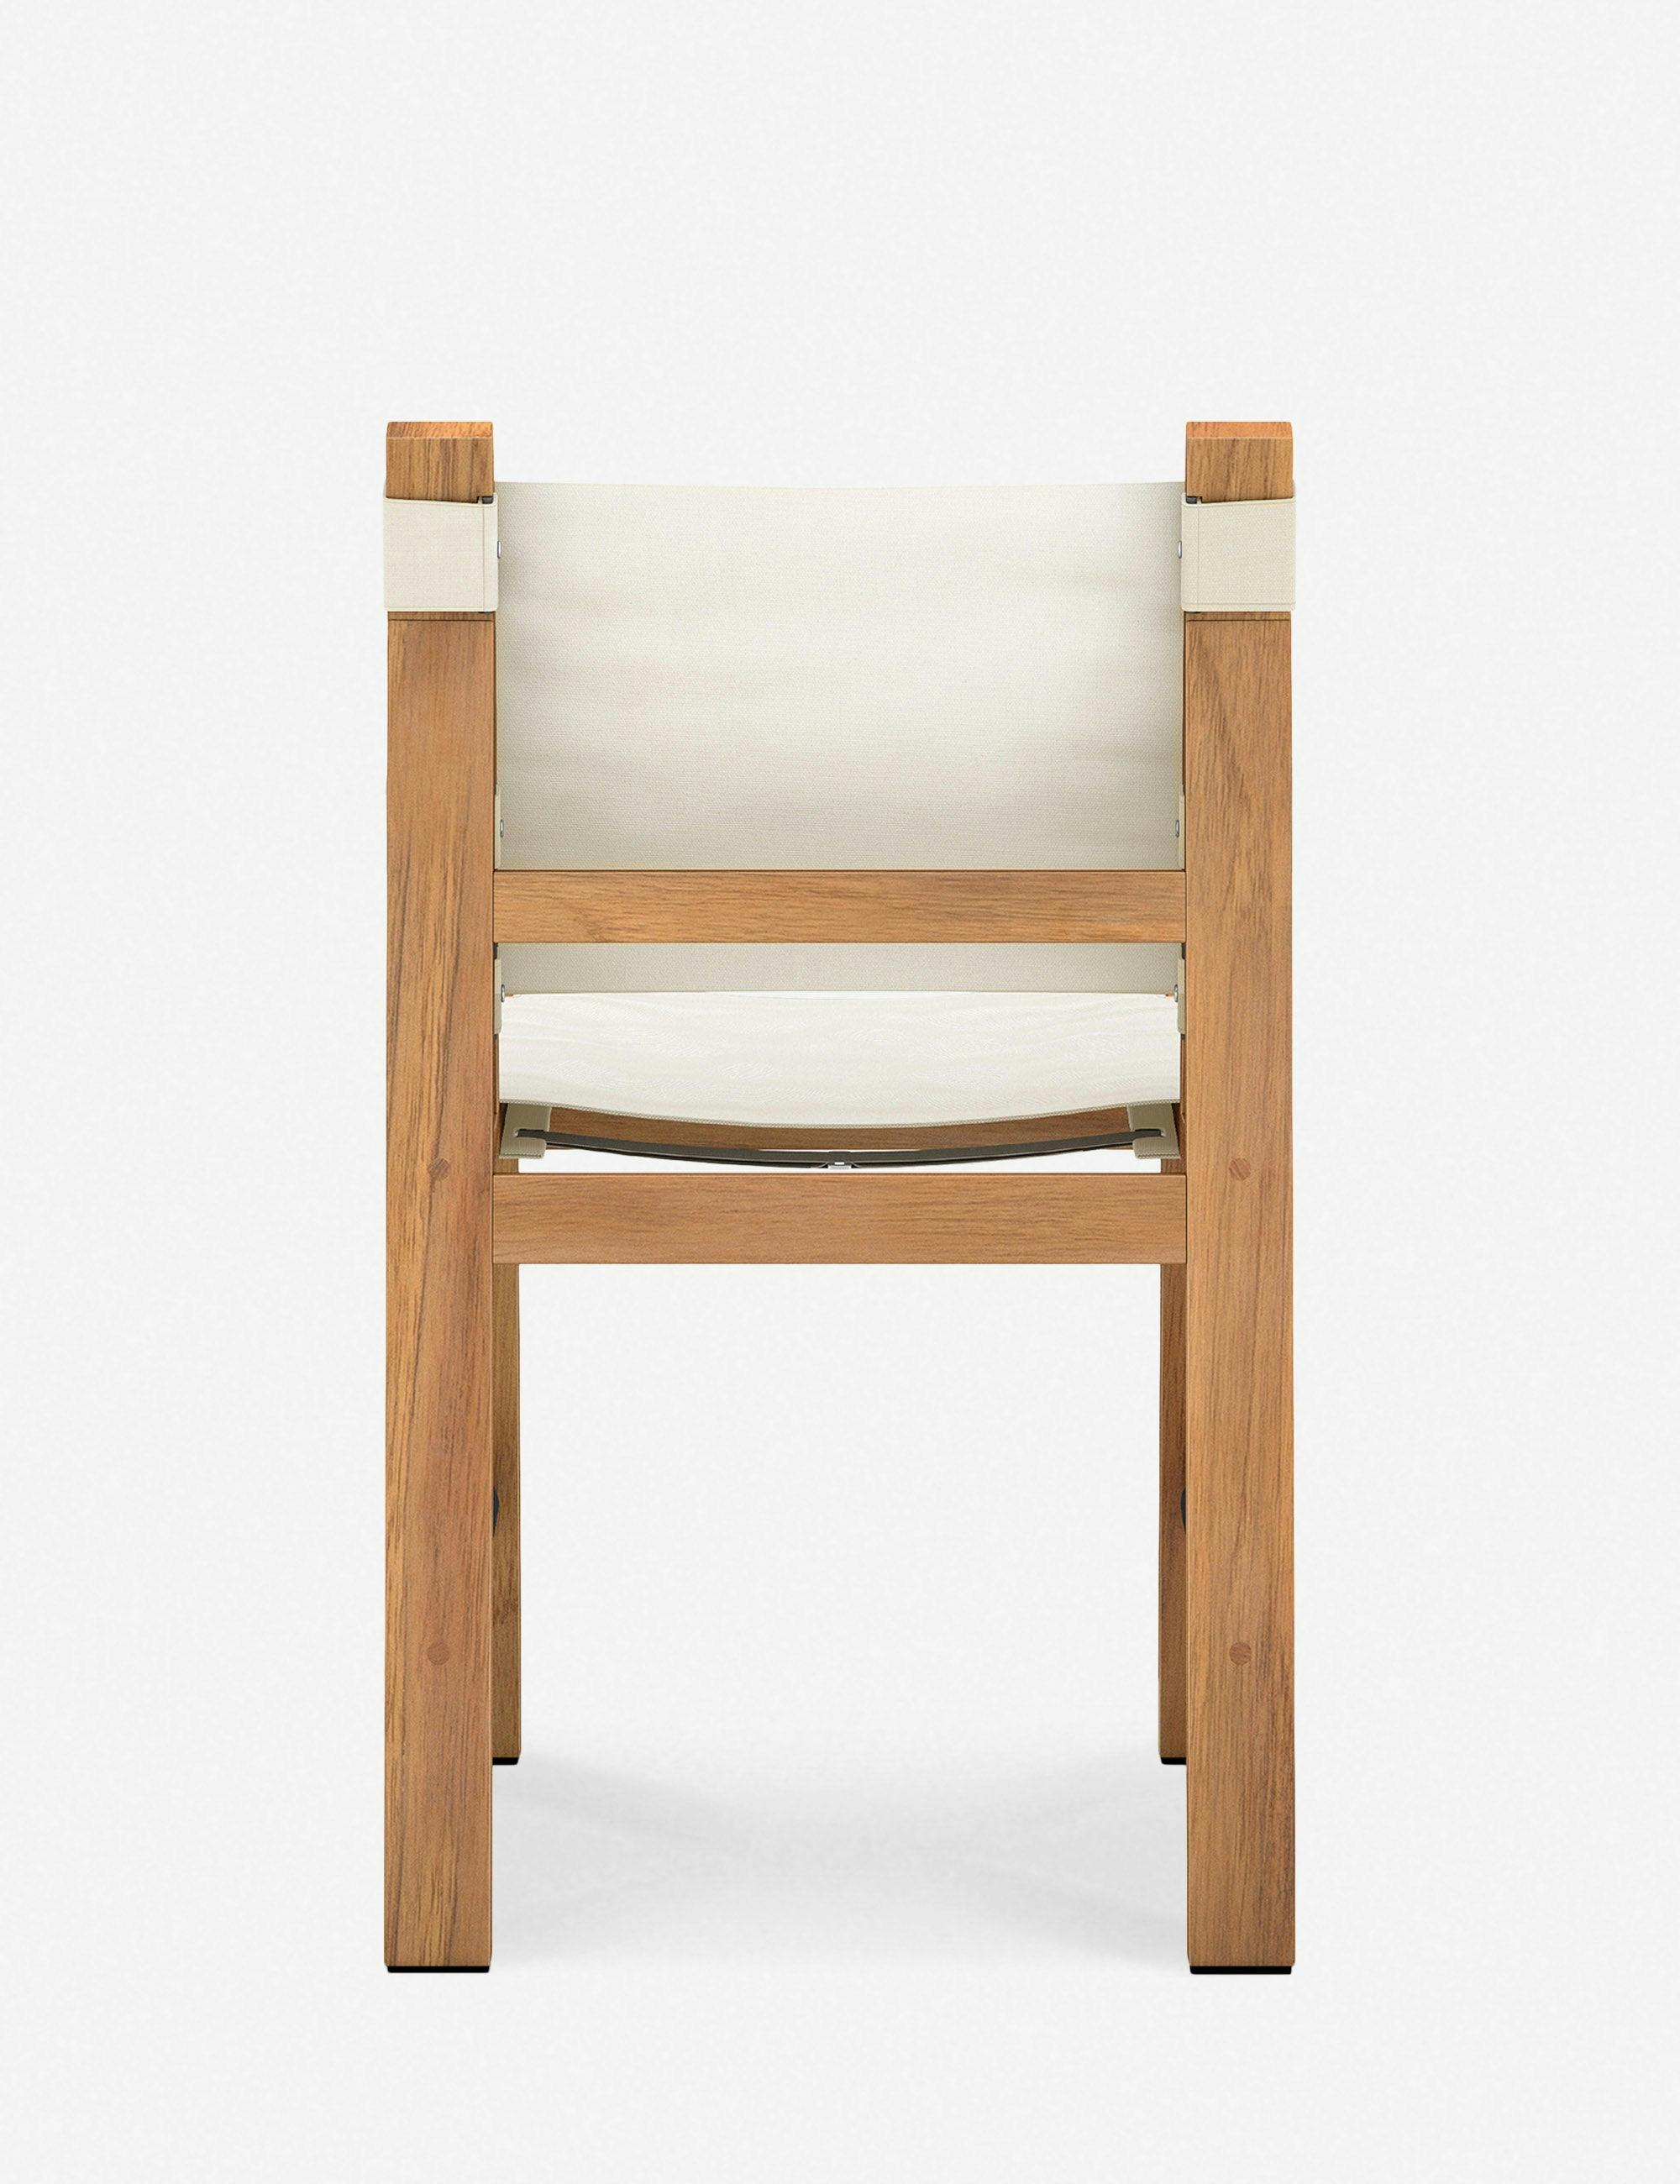 Paulette Indoor / Outdoor Dining Chair - Ivory